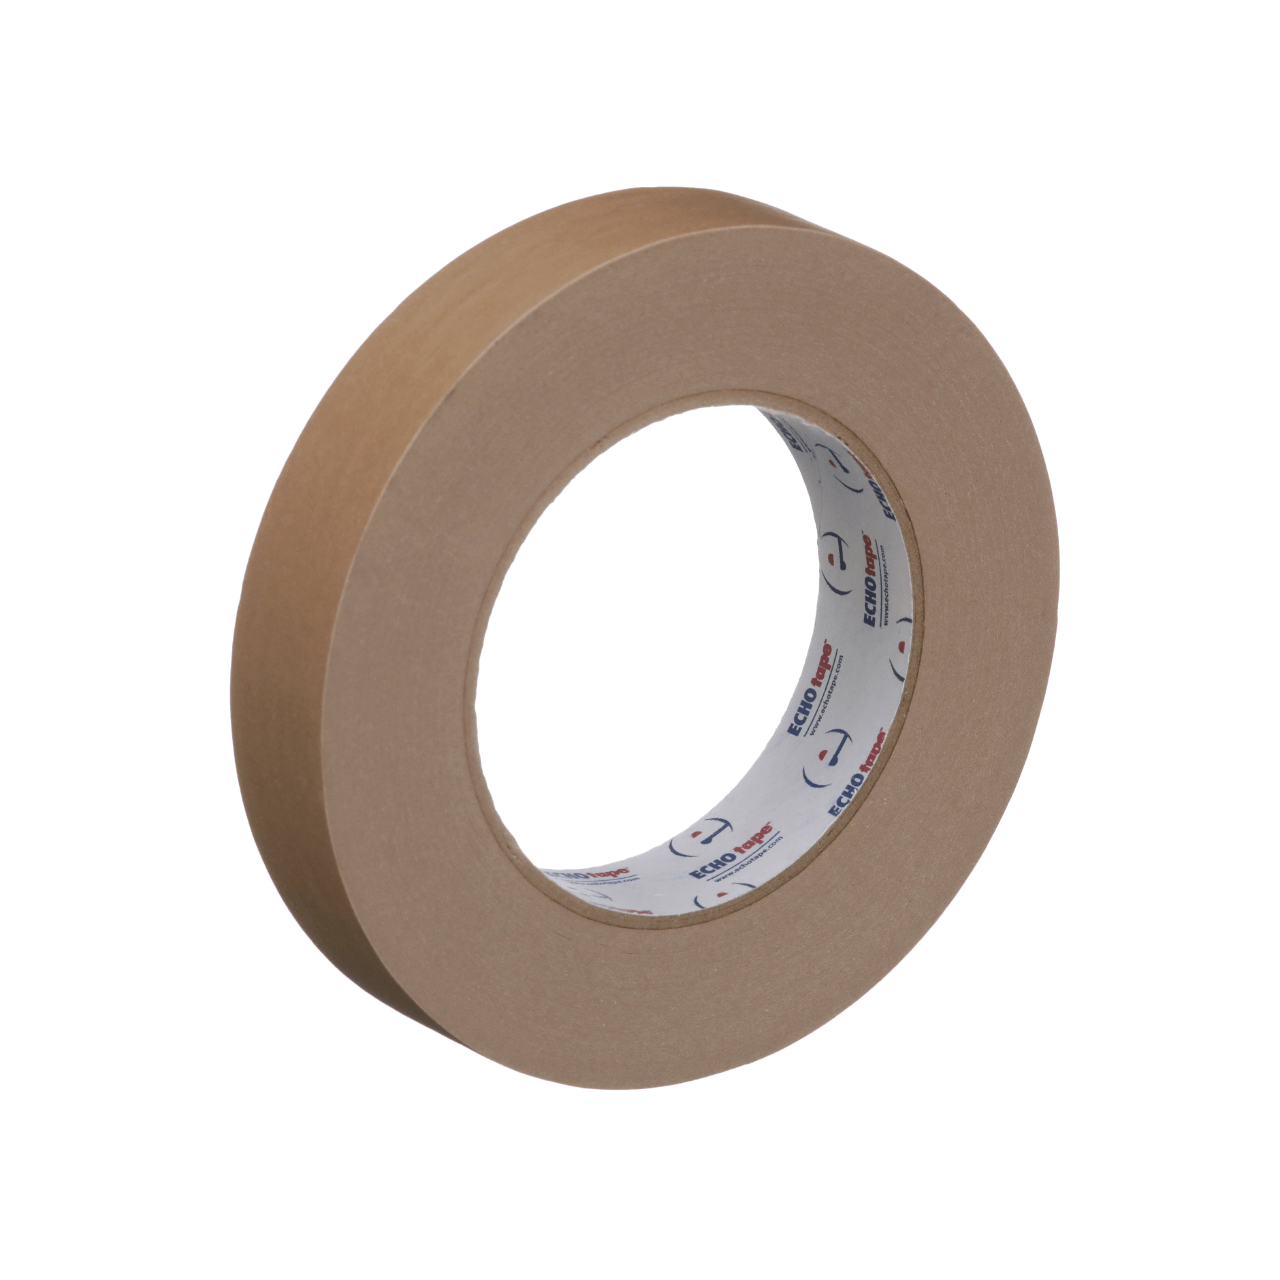  ECHOtape DC-U032A White Double Sided Tape for